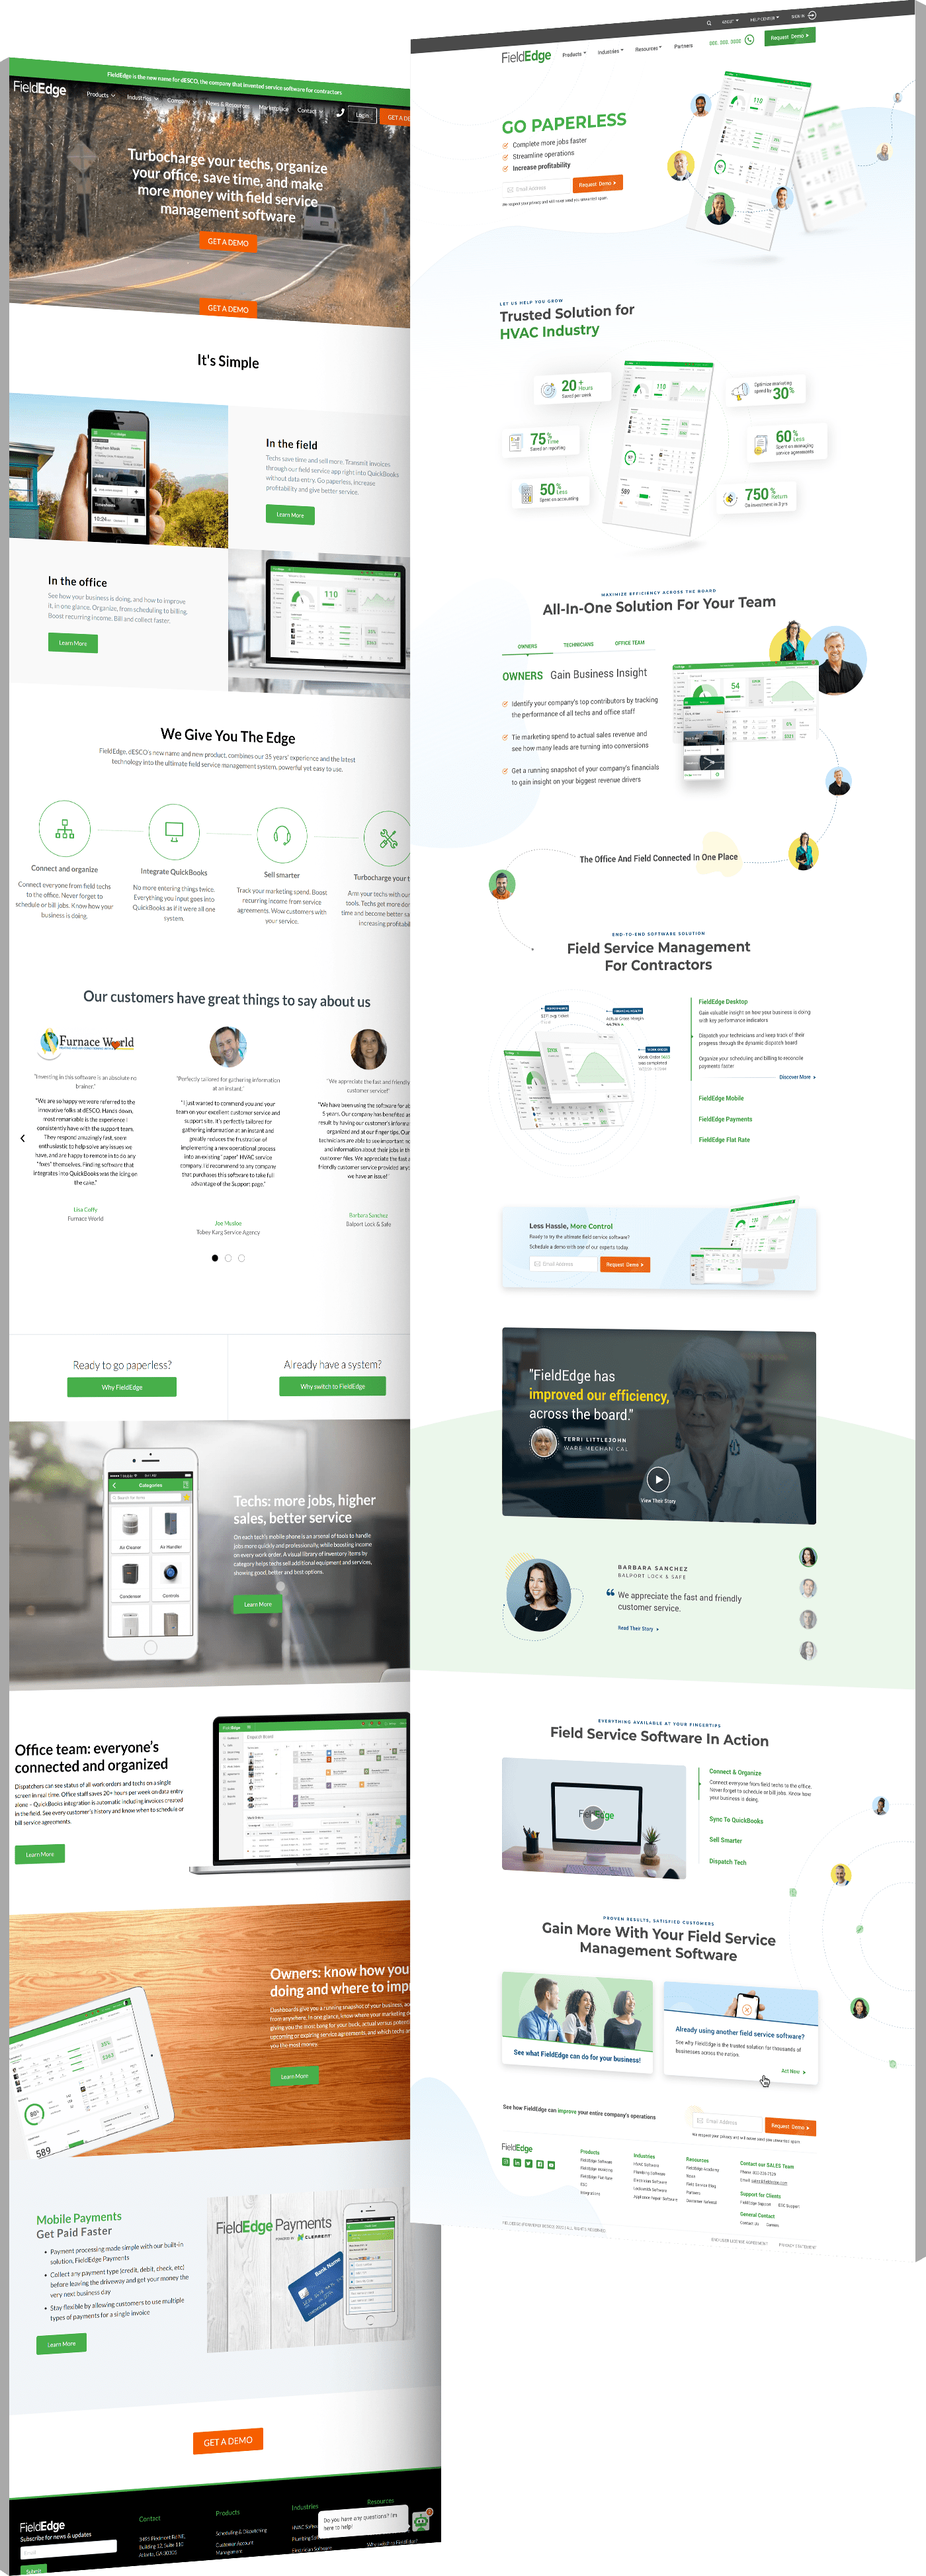 Web design before and after photos of FieldEdge website